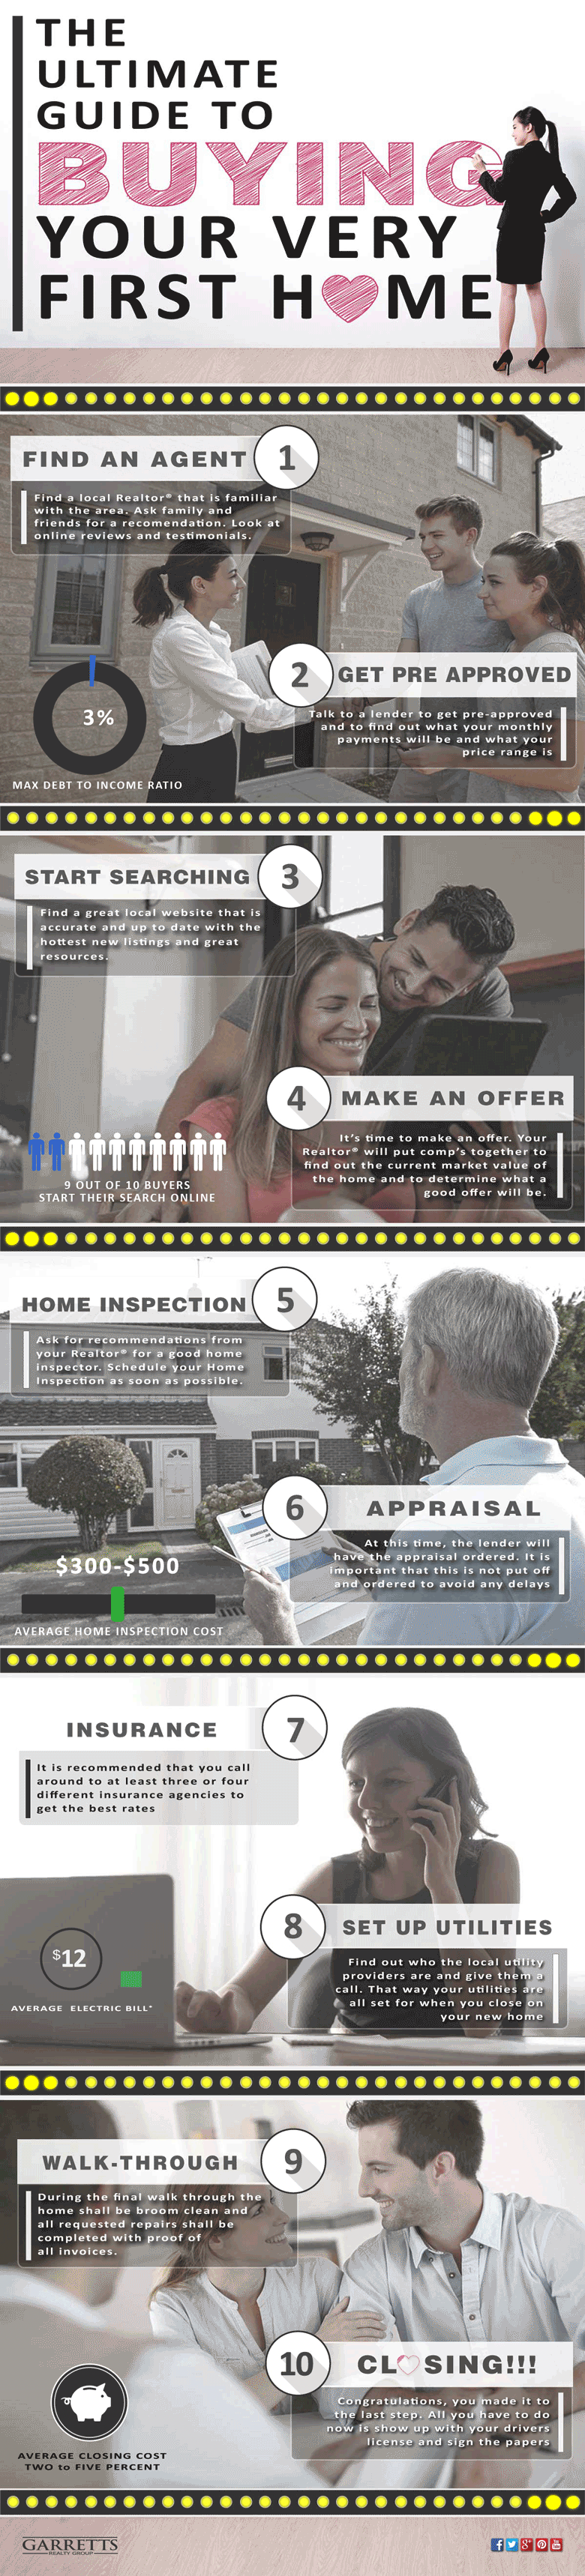 Complete Guide to buying your first house - Gifographic